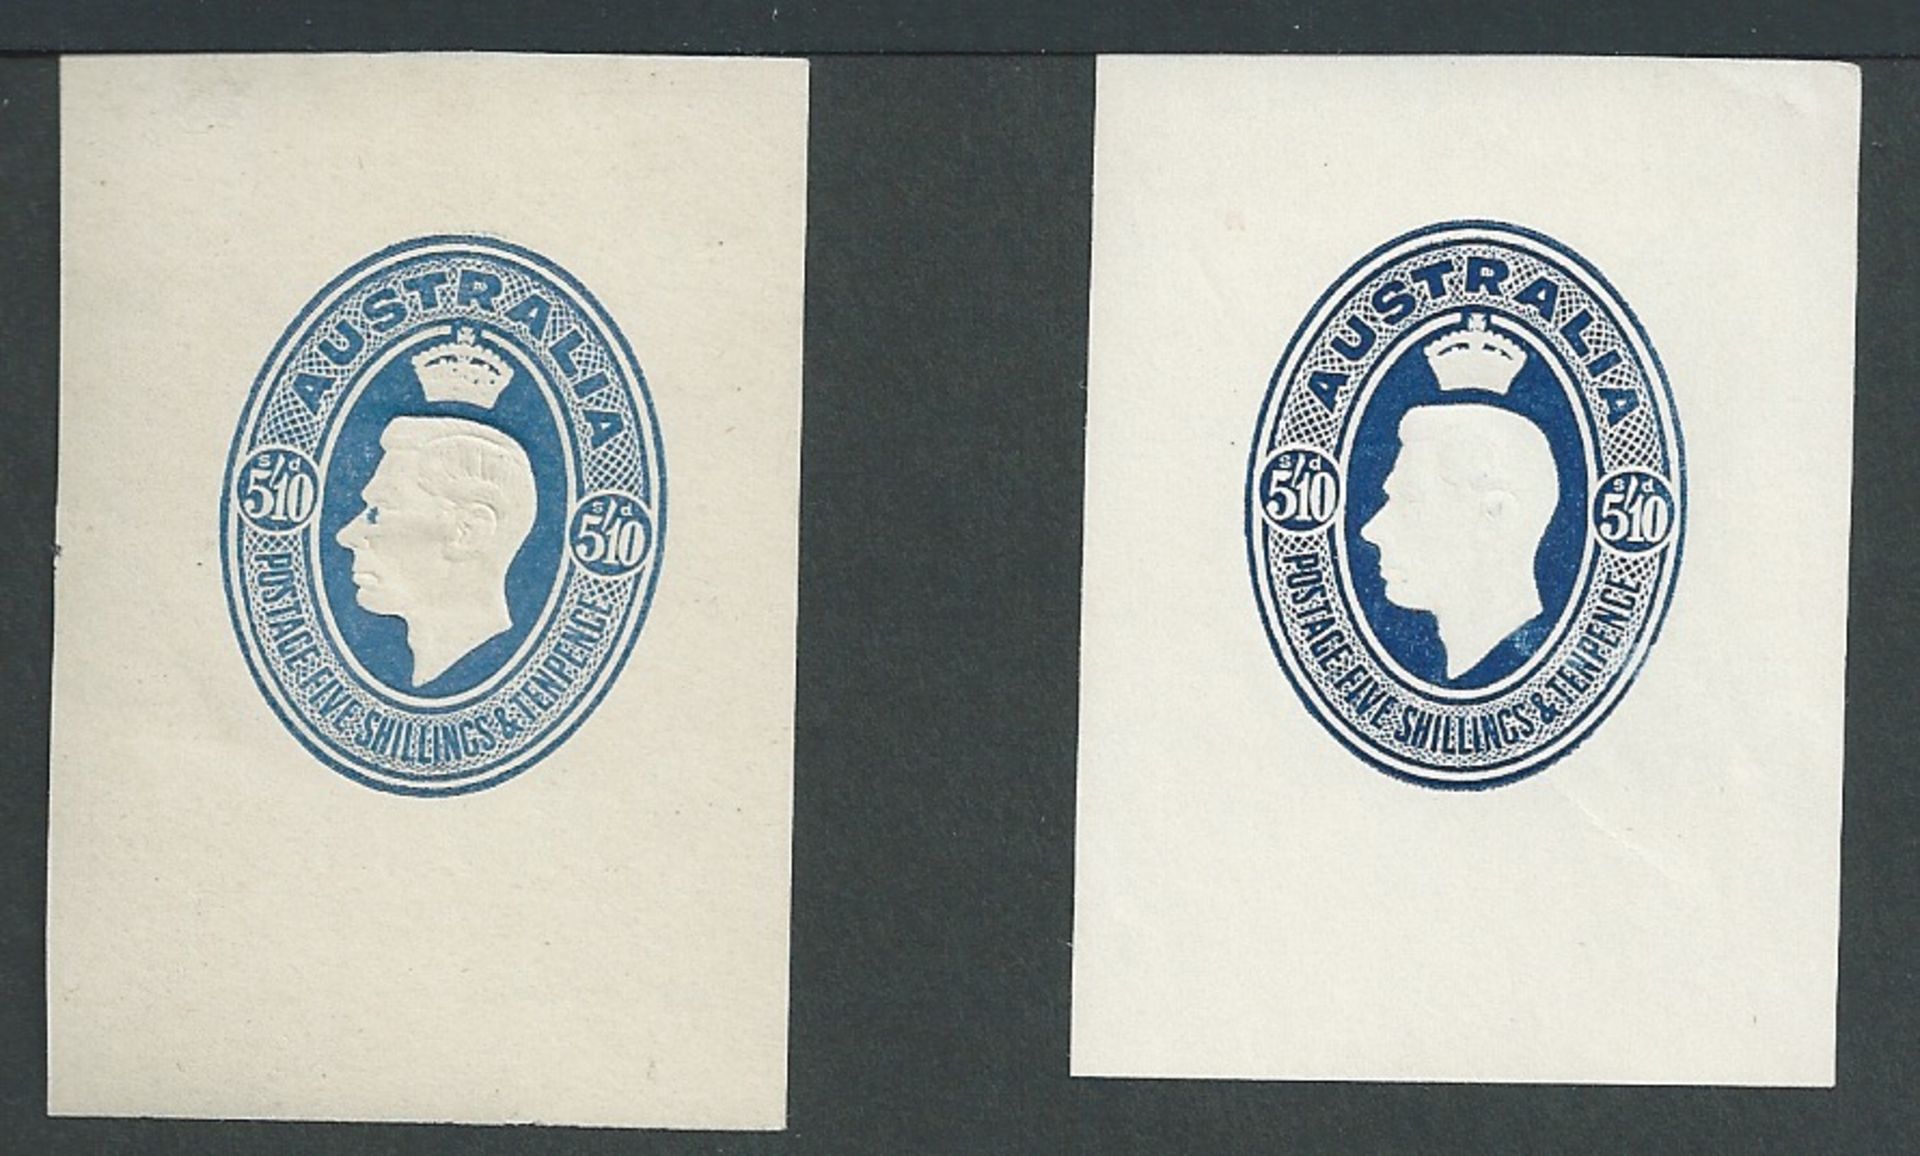 Australia 1946 5/10d Food Parcel Label cut outs - two different Dies in light and dark blue on gimme